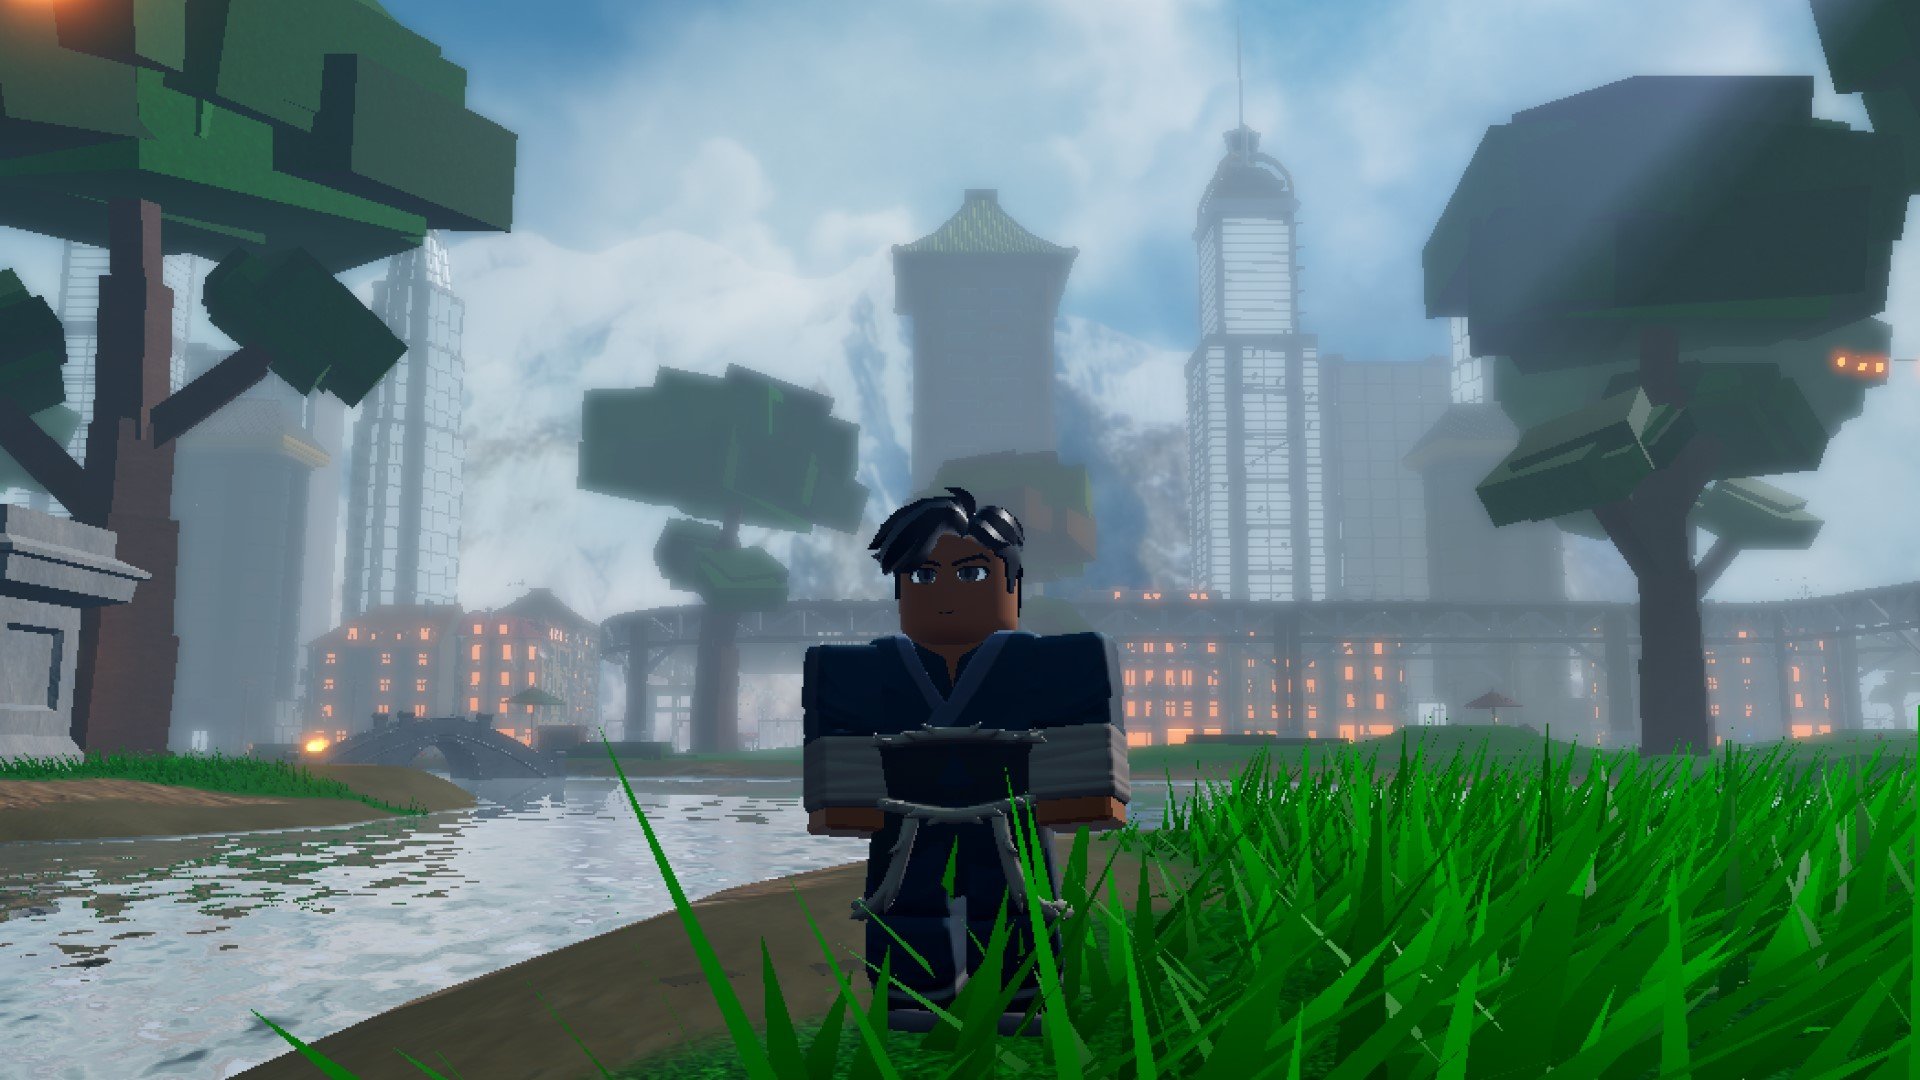 A character from Roblox game RoBending standing by a river. In the background, high-rise urban buildings are visible.